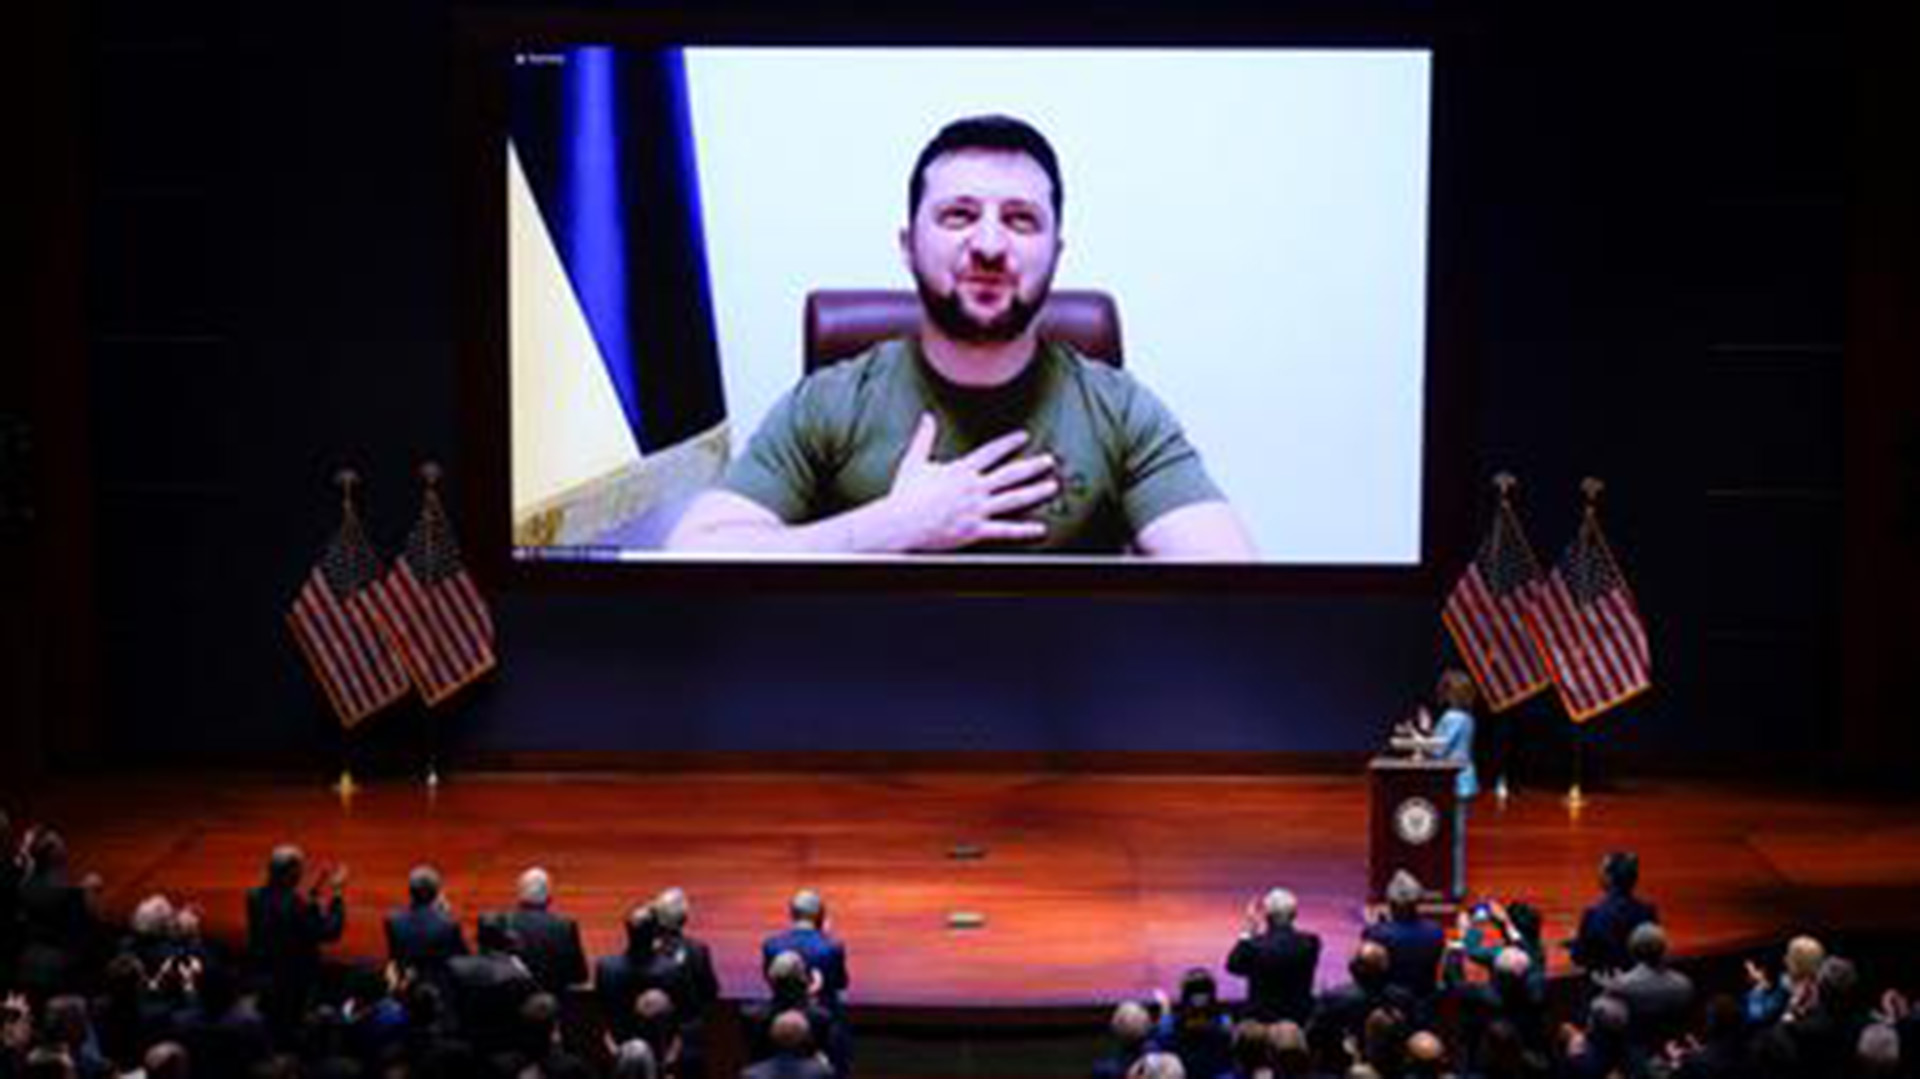 Zelensky speaking in front of the United States Congress and asking for military help for Ukraine